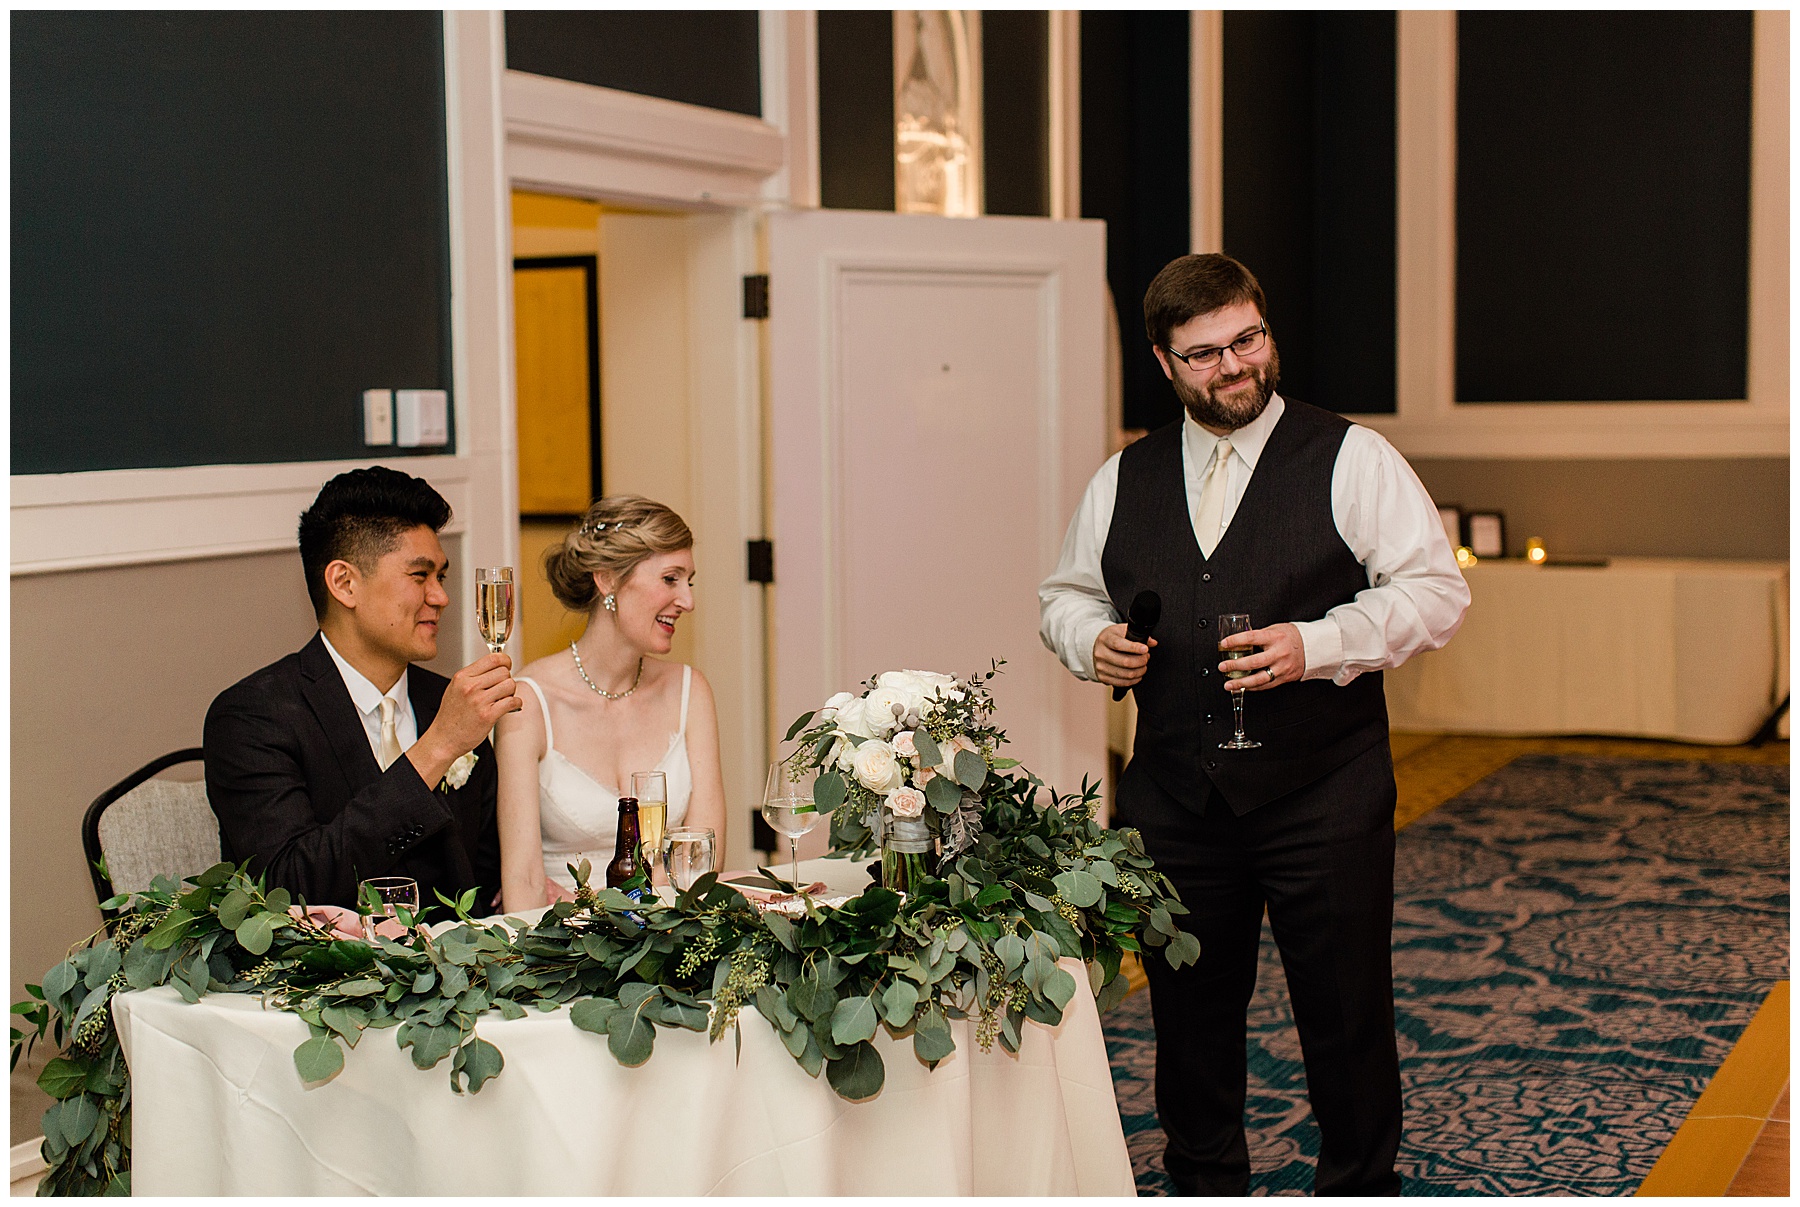 best man gives a toast in the sentinel hotel ballroom. the sweetheart table is covered in lush greenery